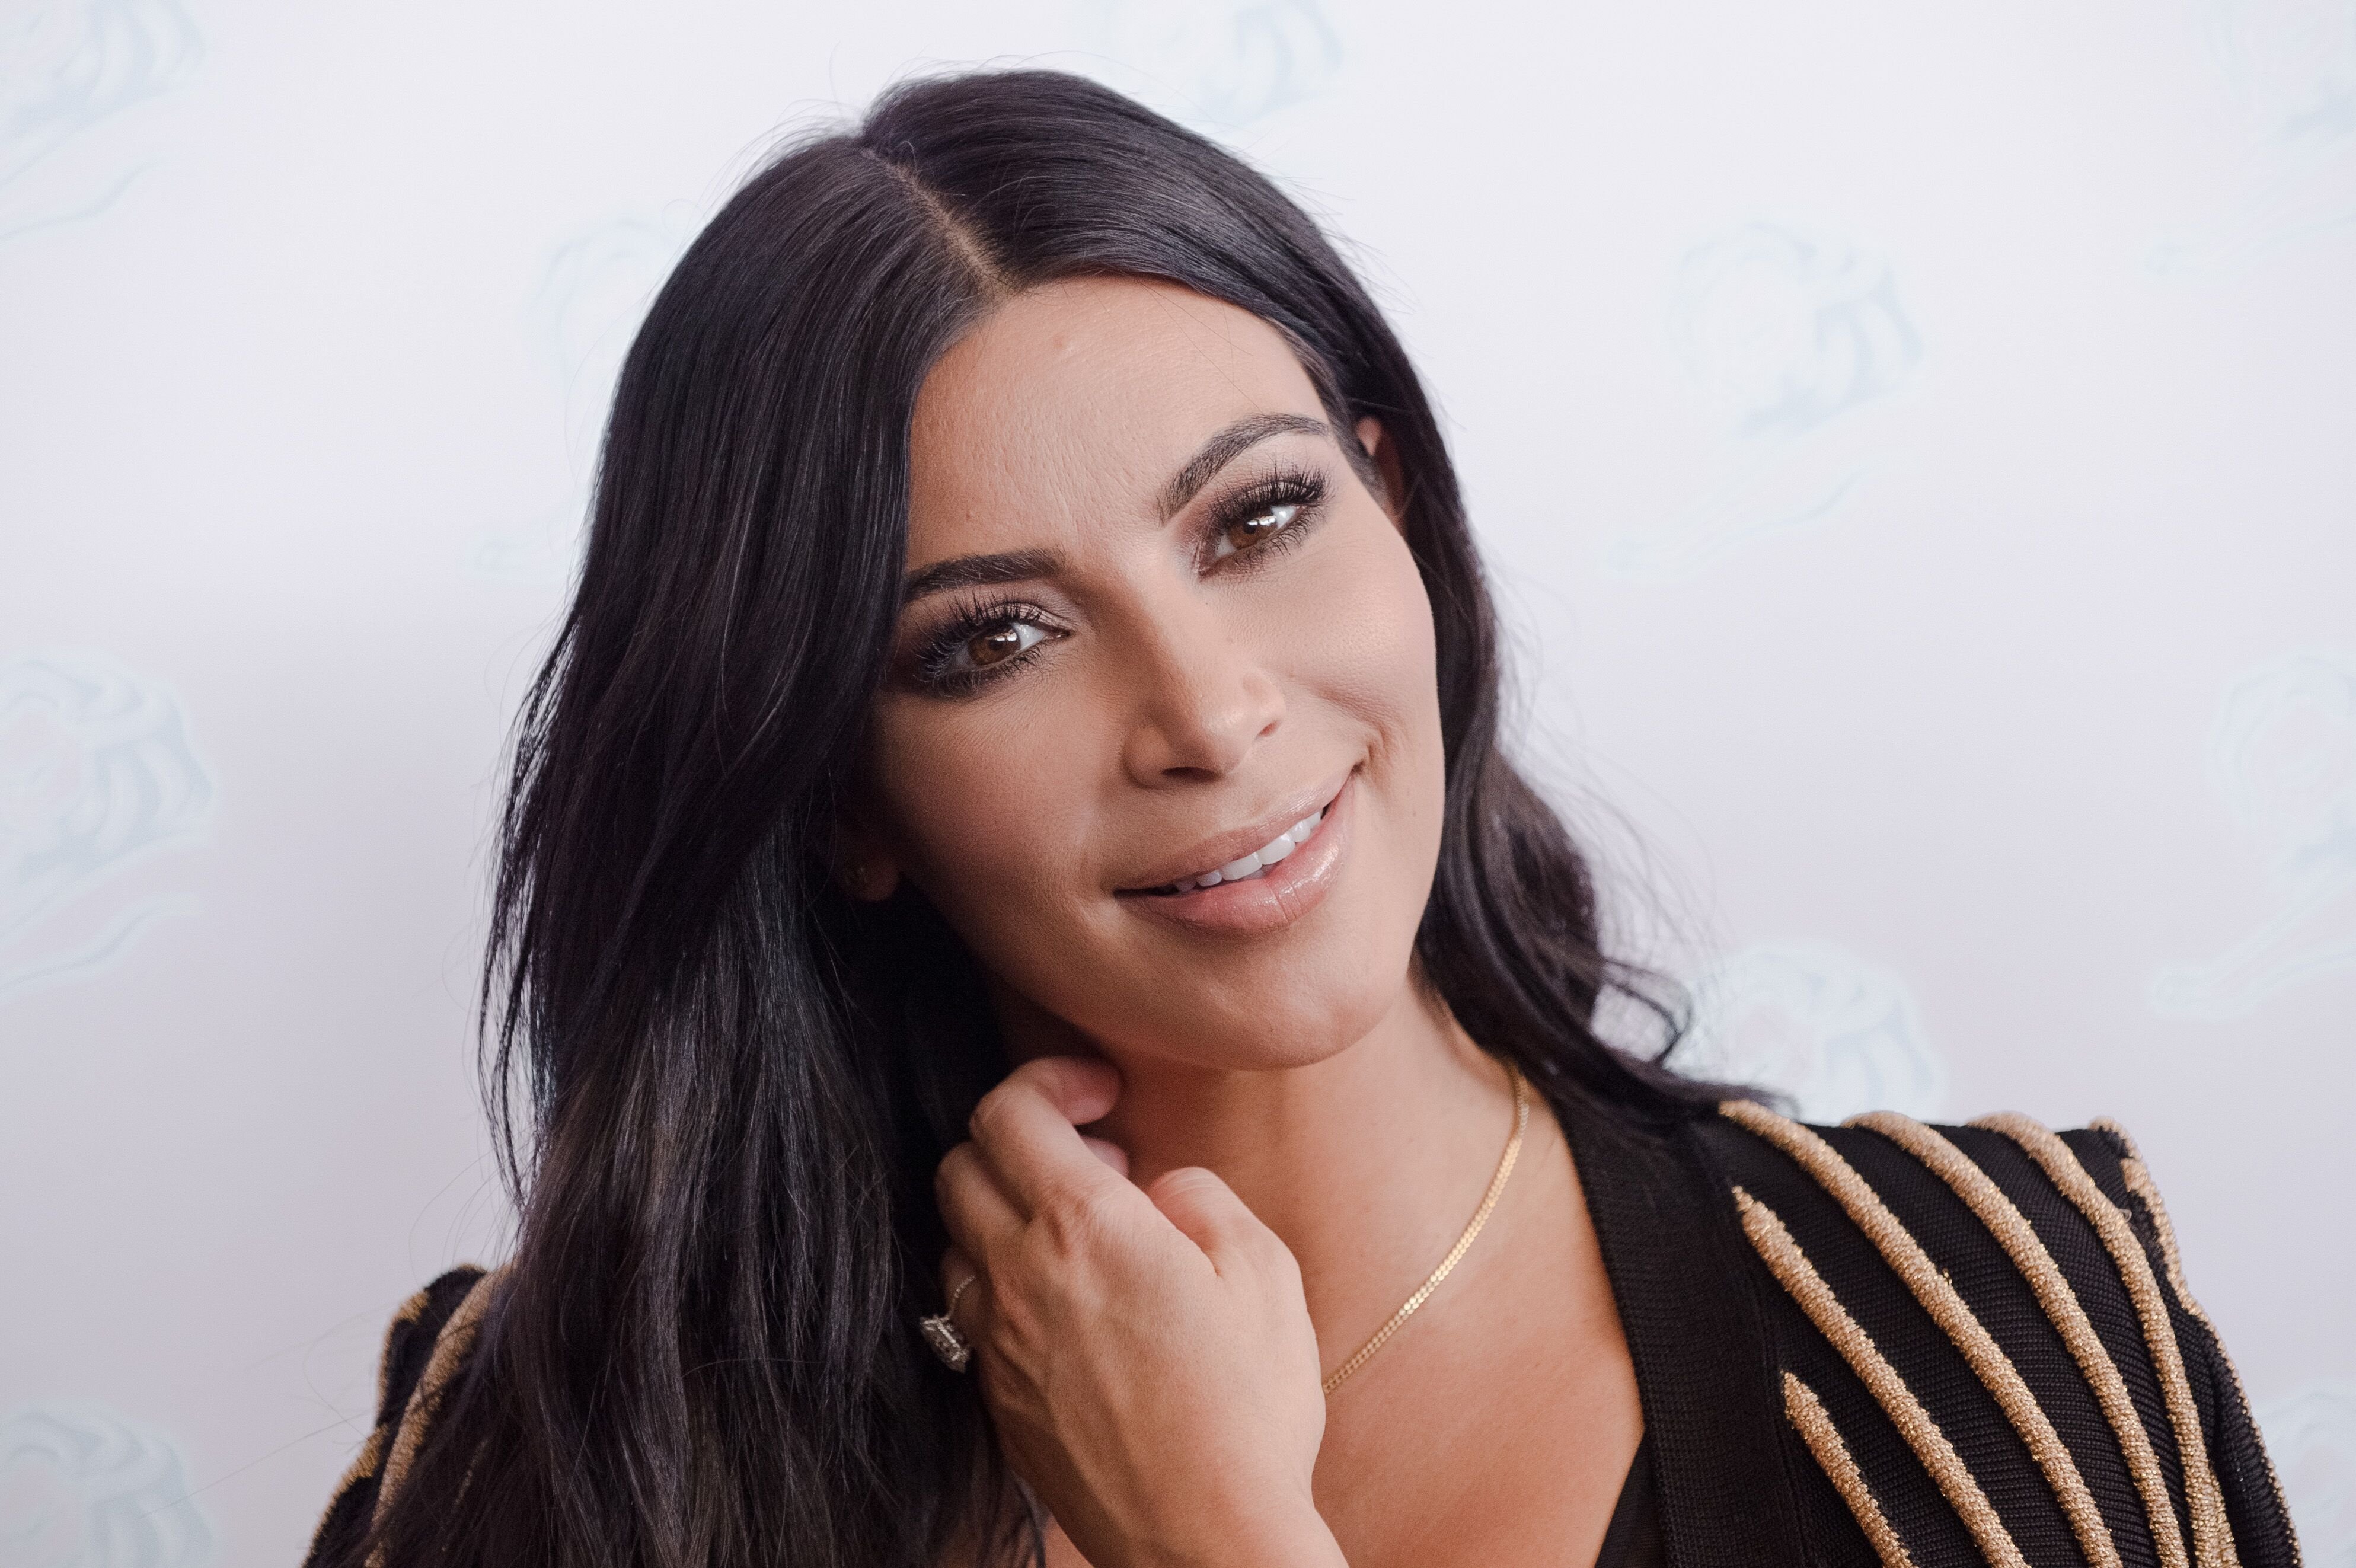 Kim Kardashian attends a 'Sudler' talk during Cannes Lions International Festival of Creativity | Photo: Getty Images